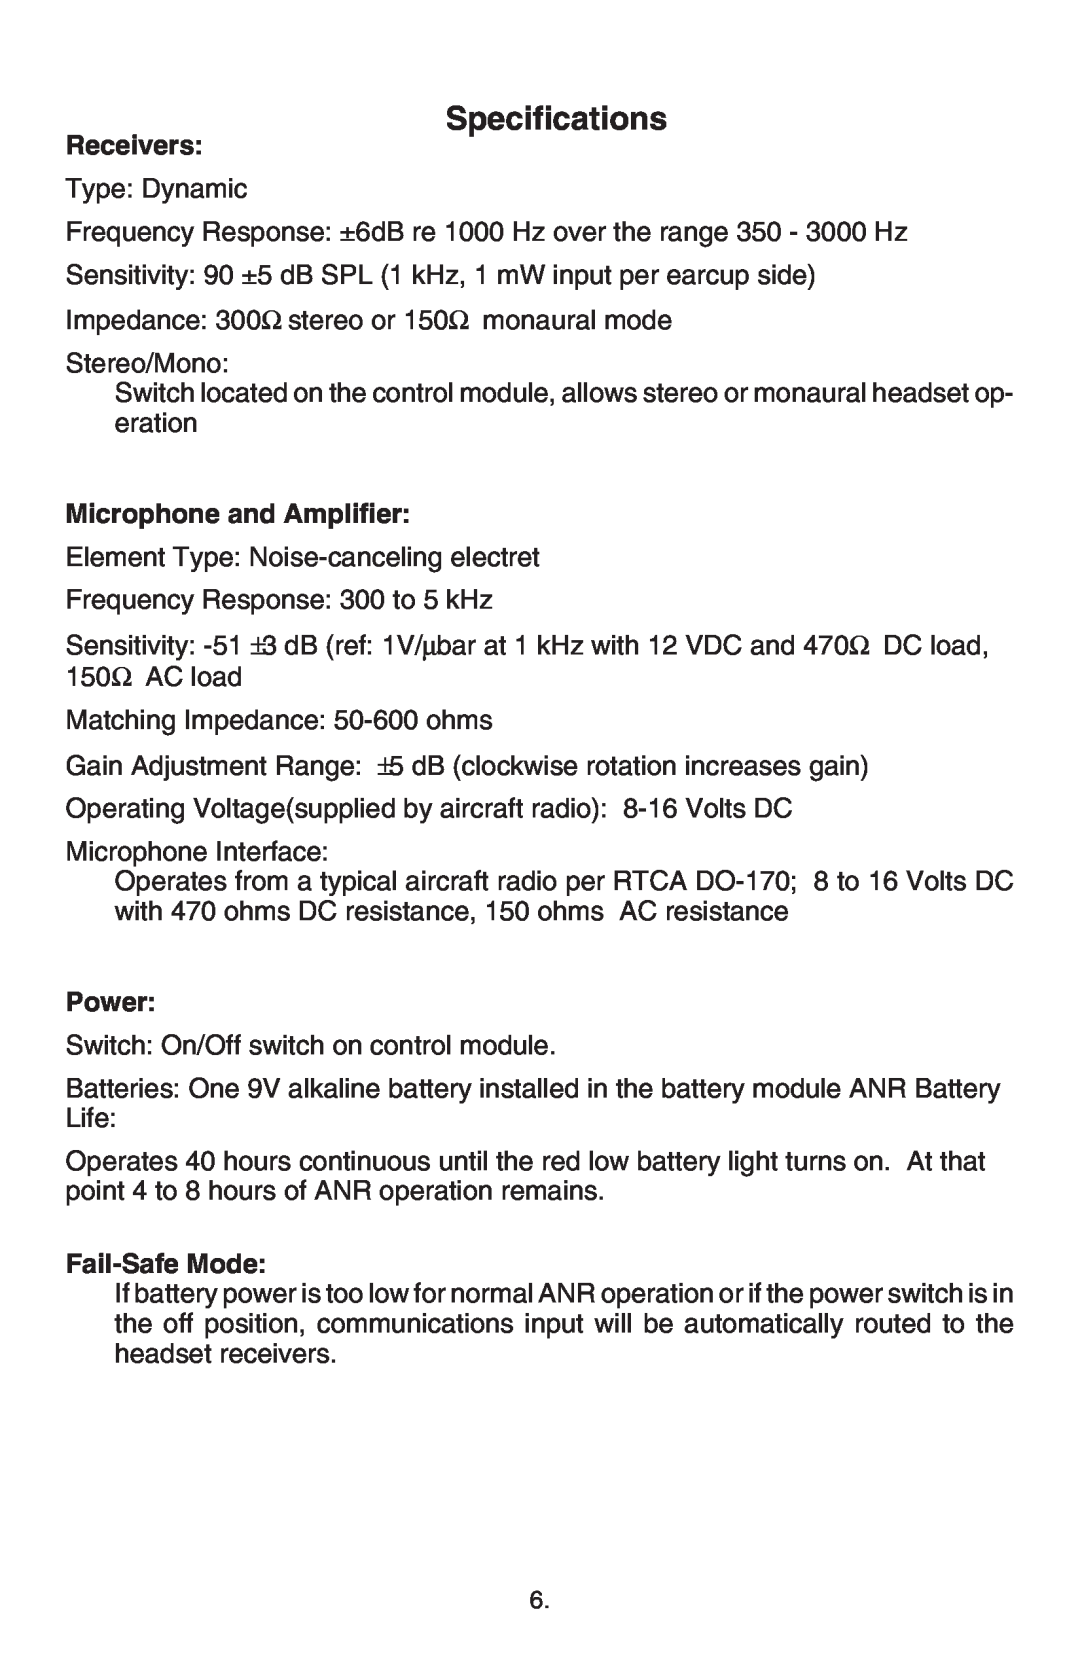 Telex ANR TM 500 operating instructions Specifications, Receivers, Microphone and Amplifier, Power, Fail-SafeMode 